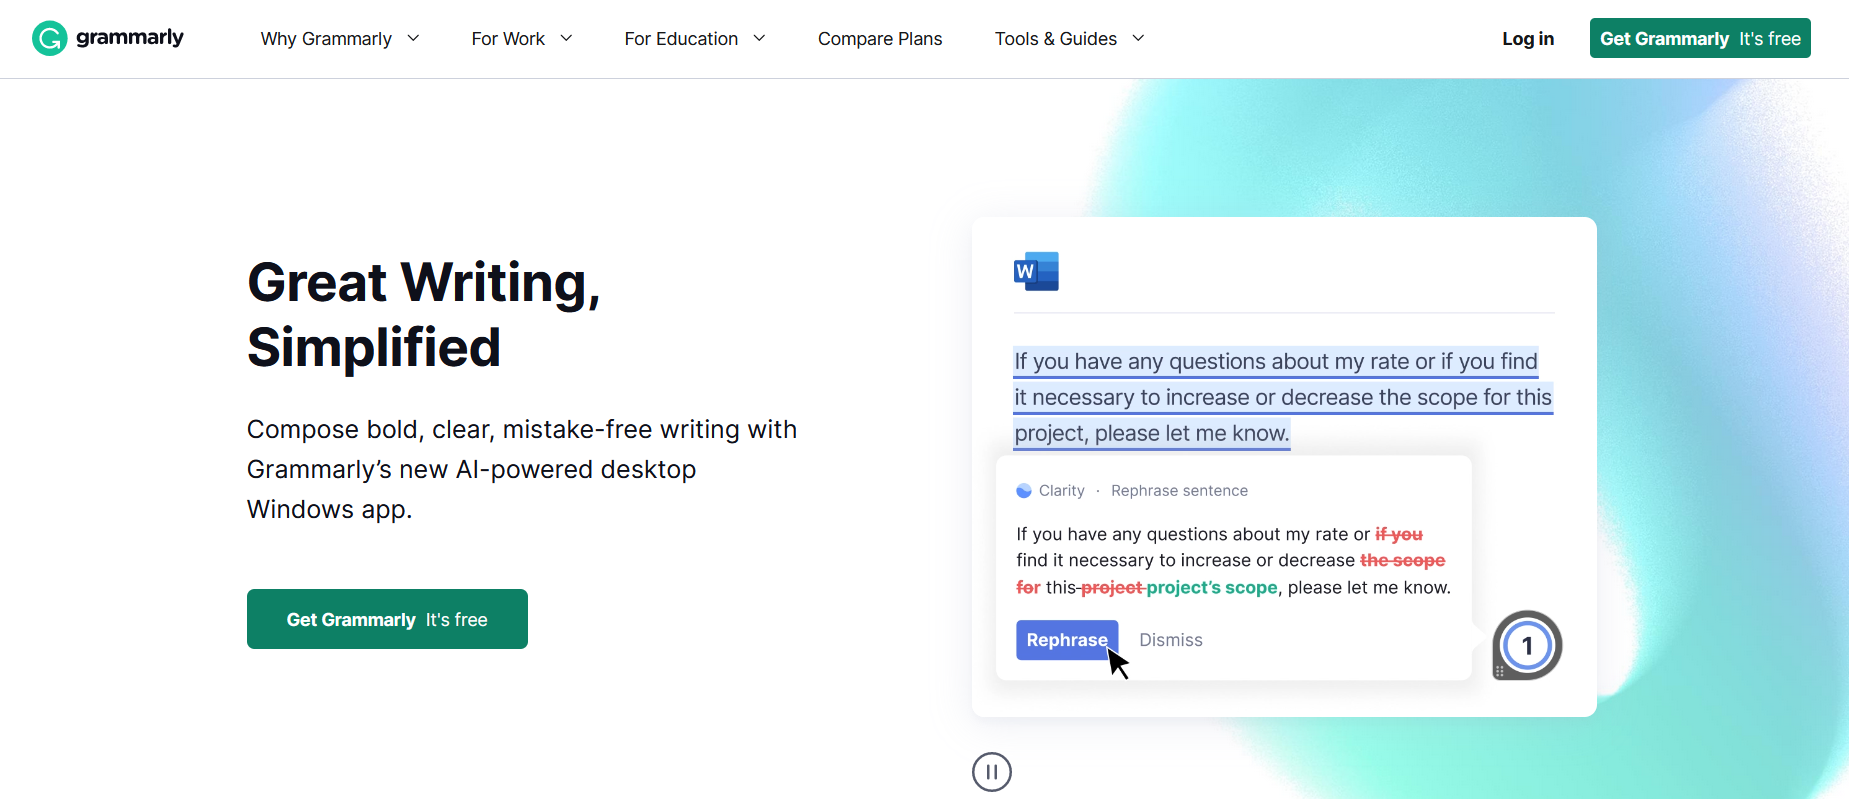 free content writing tool